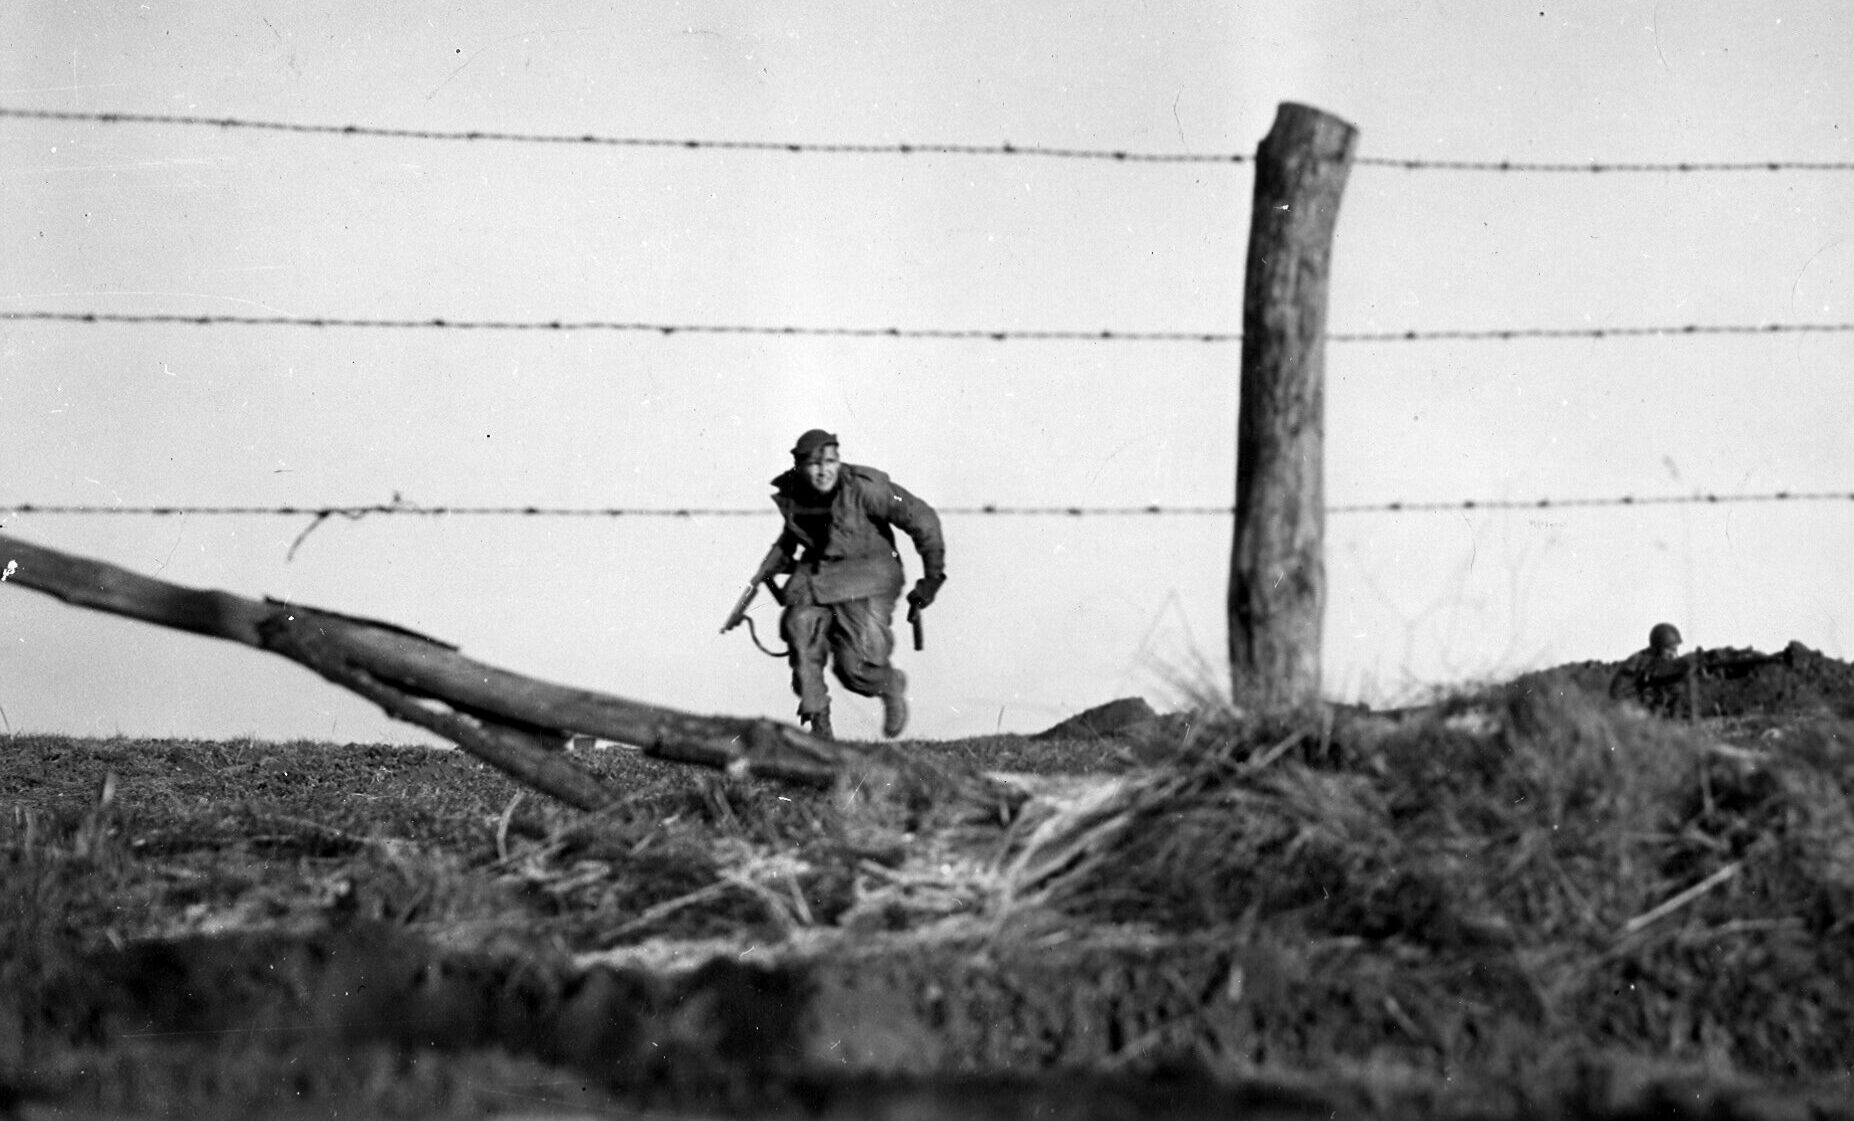 A helmetless American paratrooper from the 82nd Airborne Division carrying a tommygun in full gallop across a Belgian field was captured by the lens of Emil Edgren.